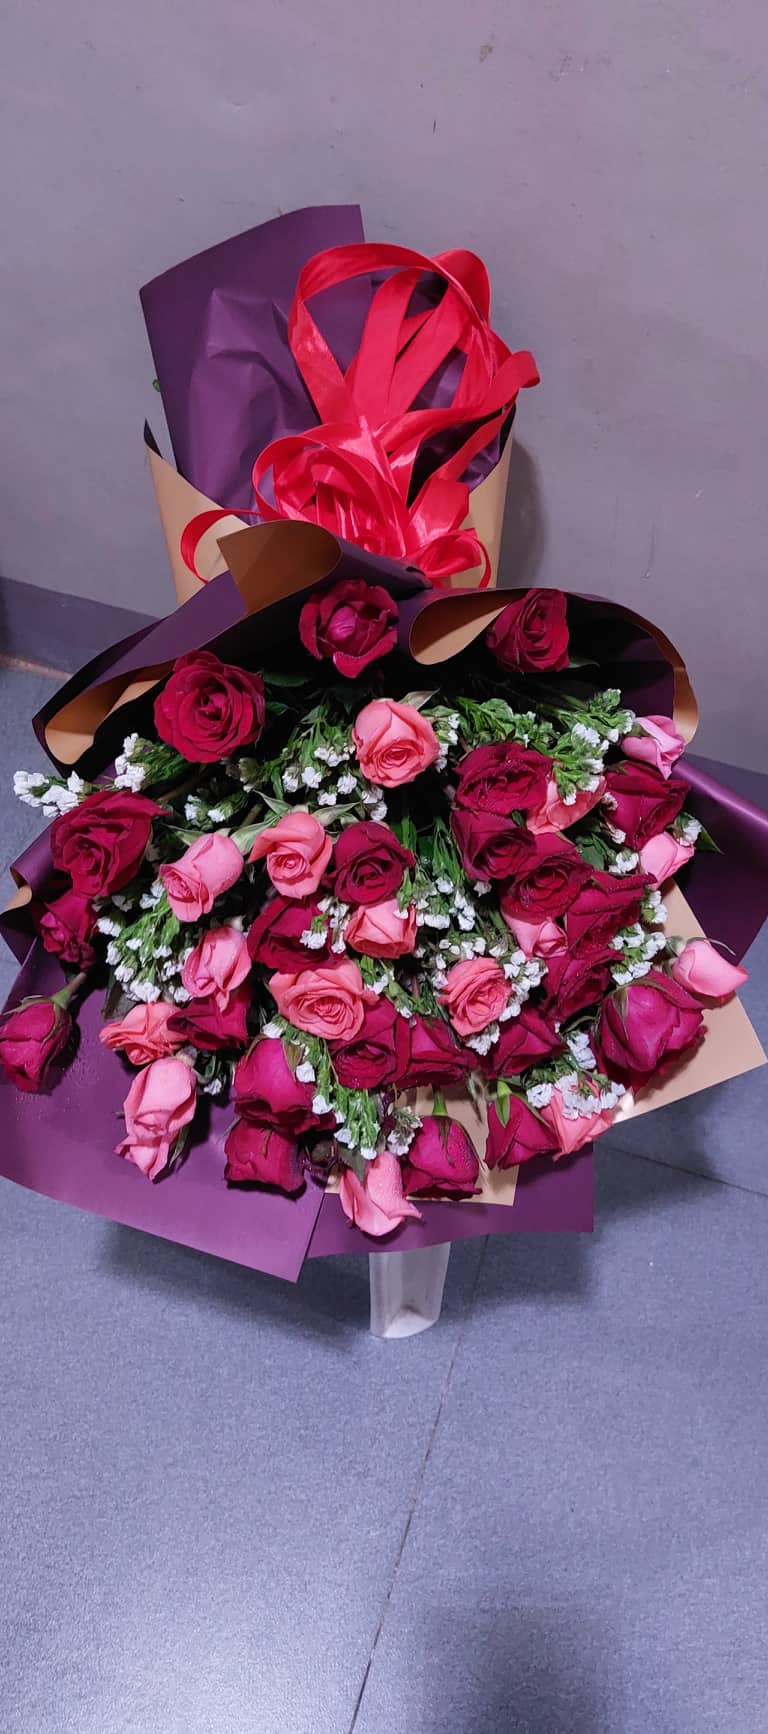 red and pink roses bouquet 3 dz.